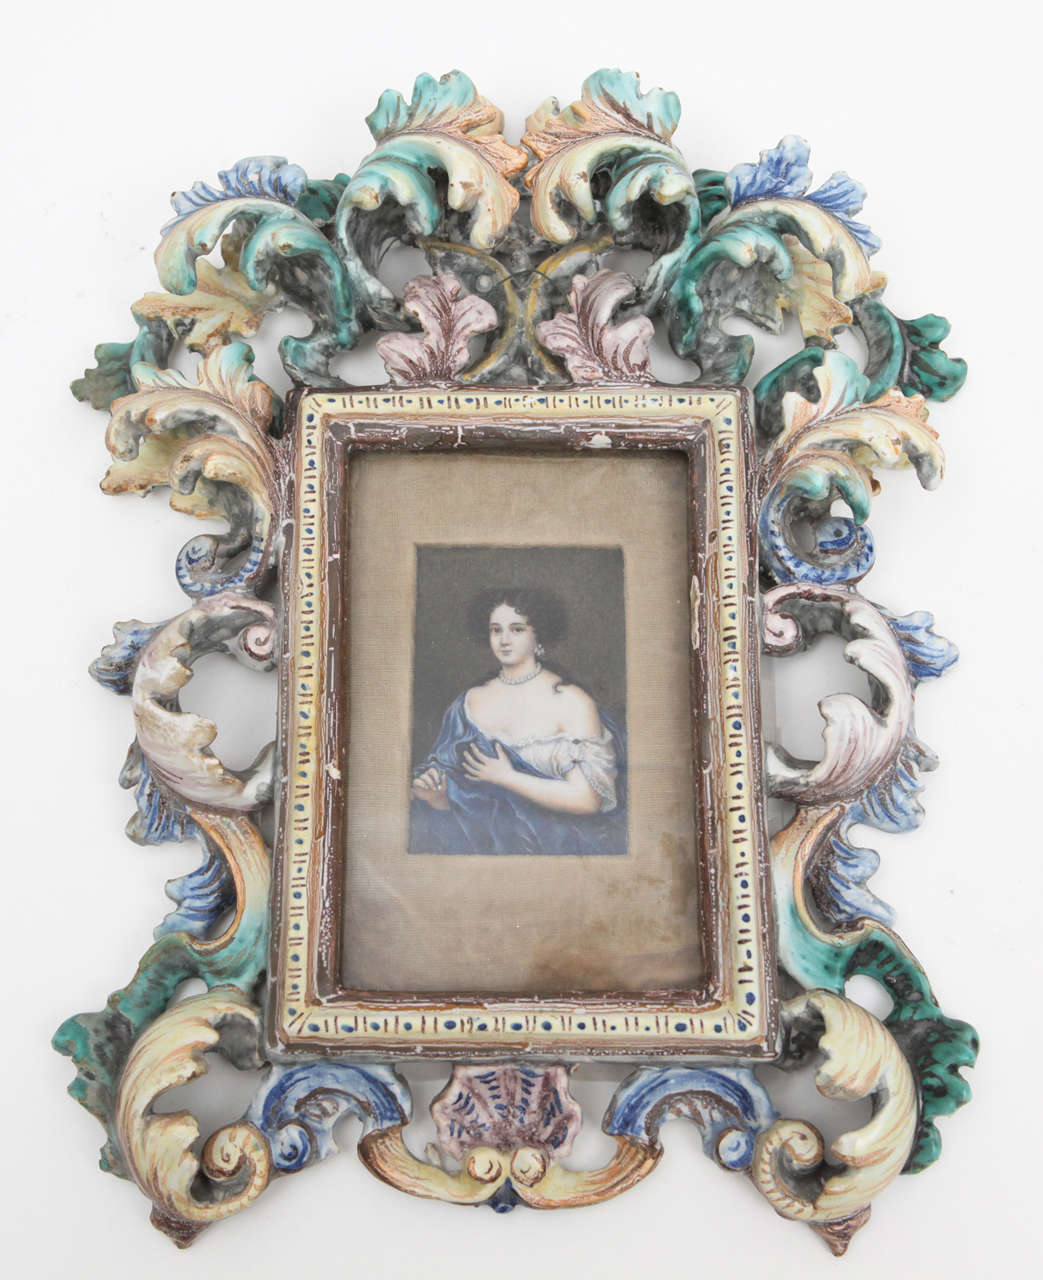 Highly unusual faience frame with maker mark holds a finely detailed portrait of a woman of importance for the time. Information is listed on back (see photos).